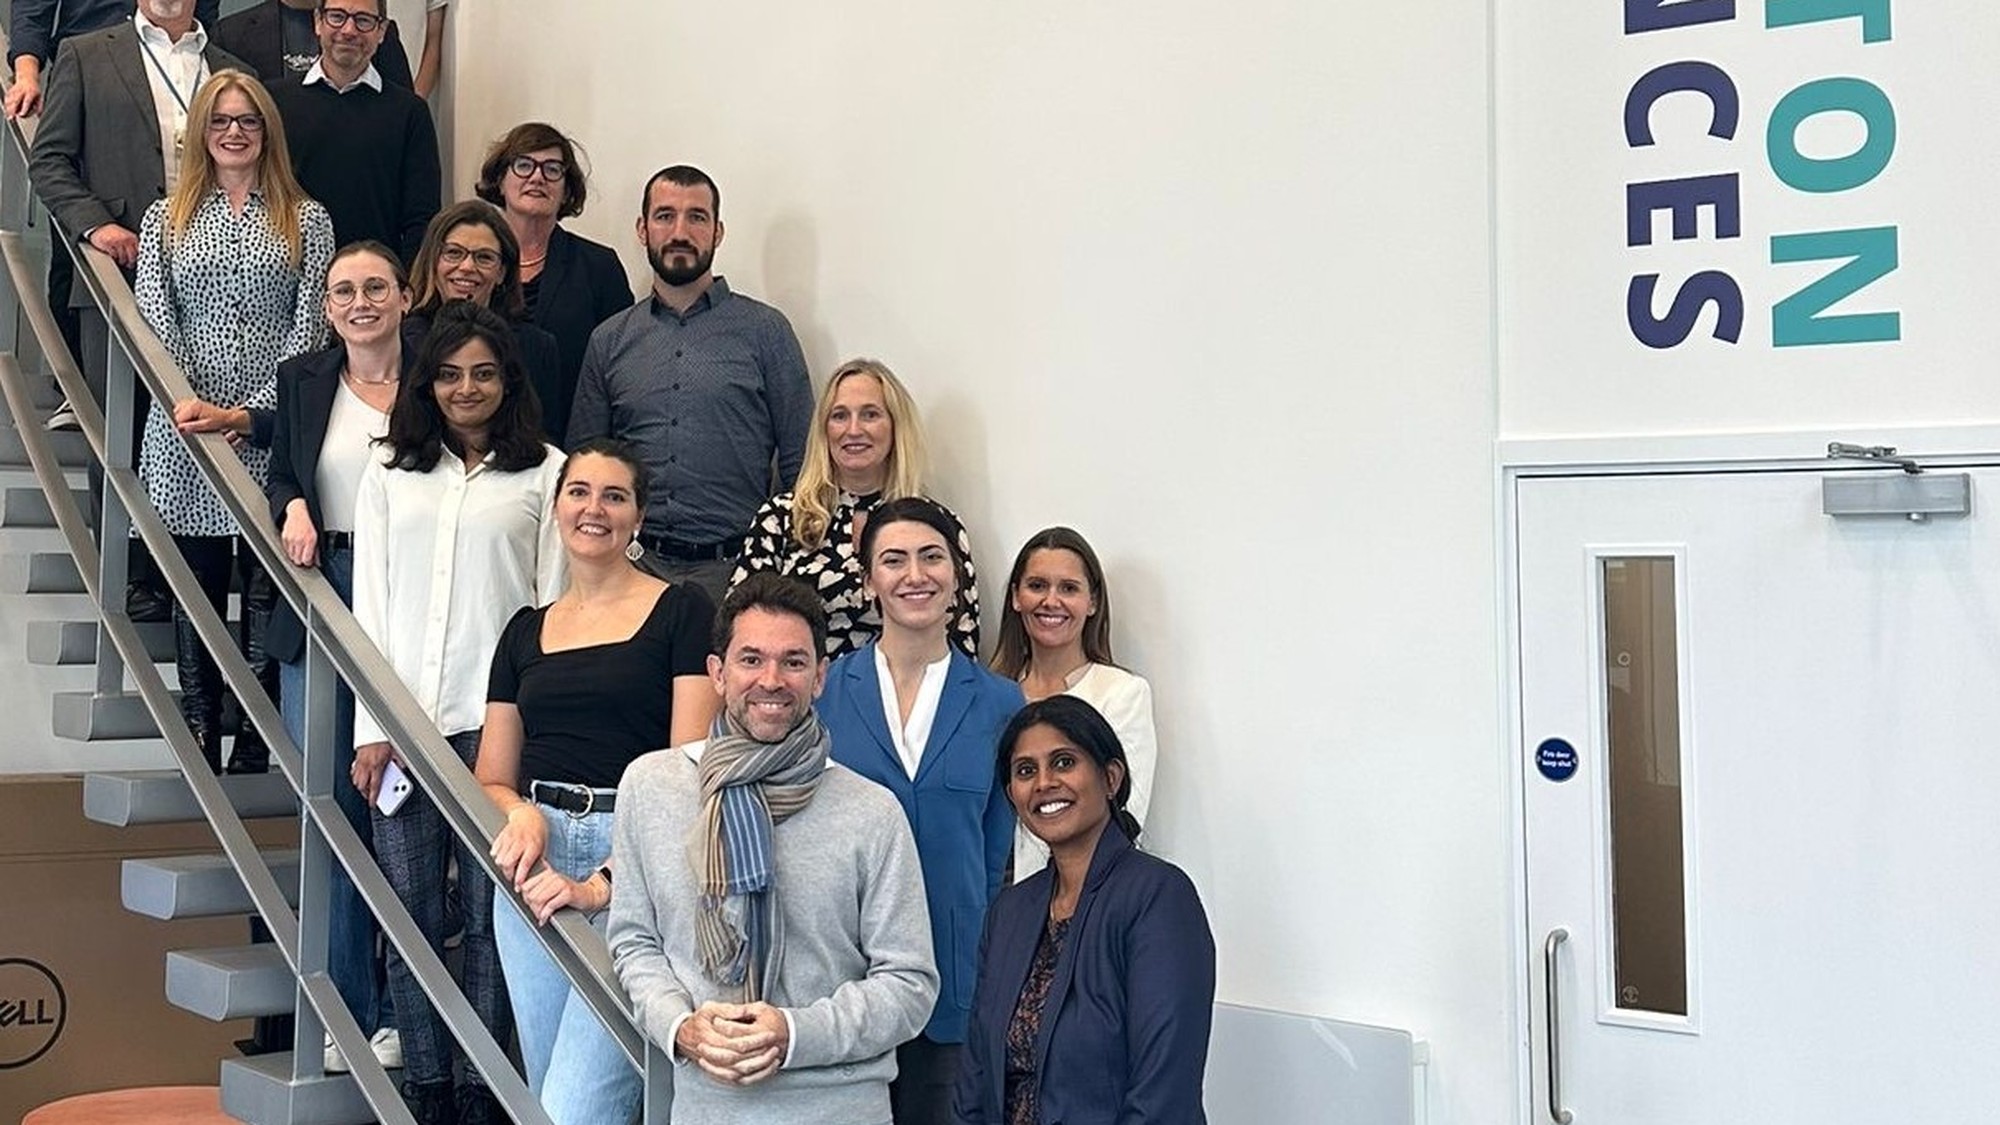 Paddington Life Sciences: Our cohort met with Paddington Life Sciences and Takeda to discuss potential collaborations on trials and research in London.